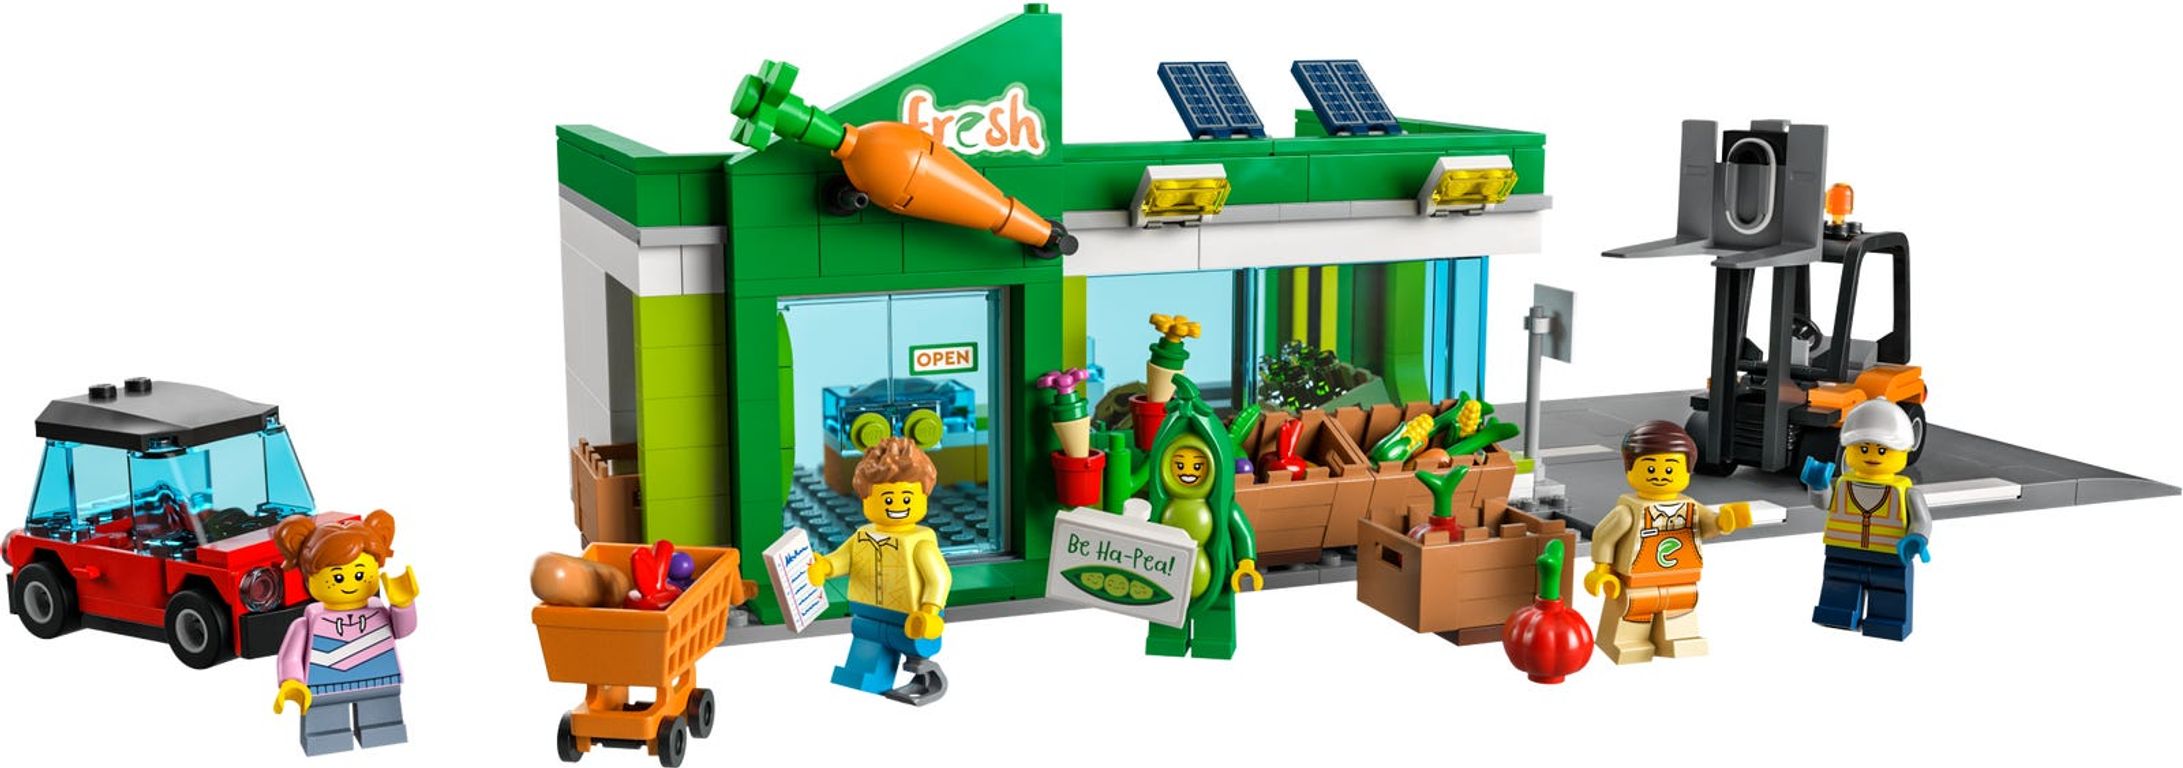 LEGO® City Grocery Store gameplay